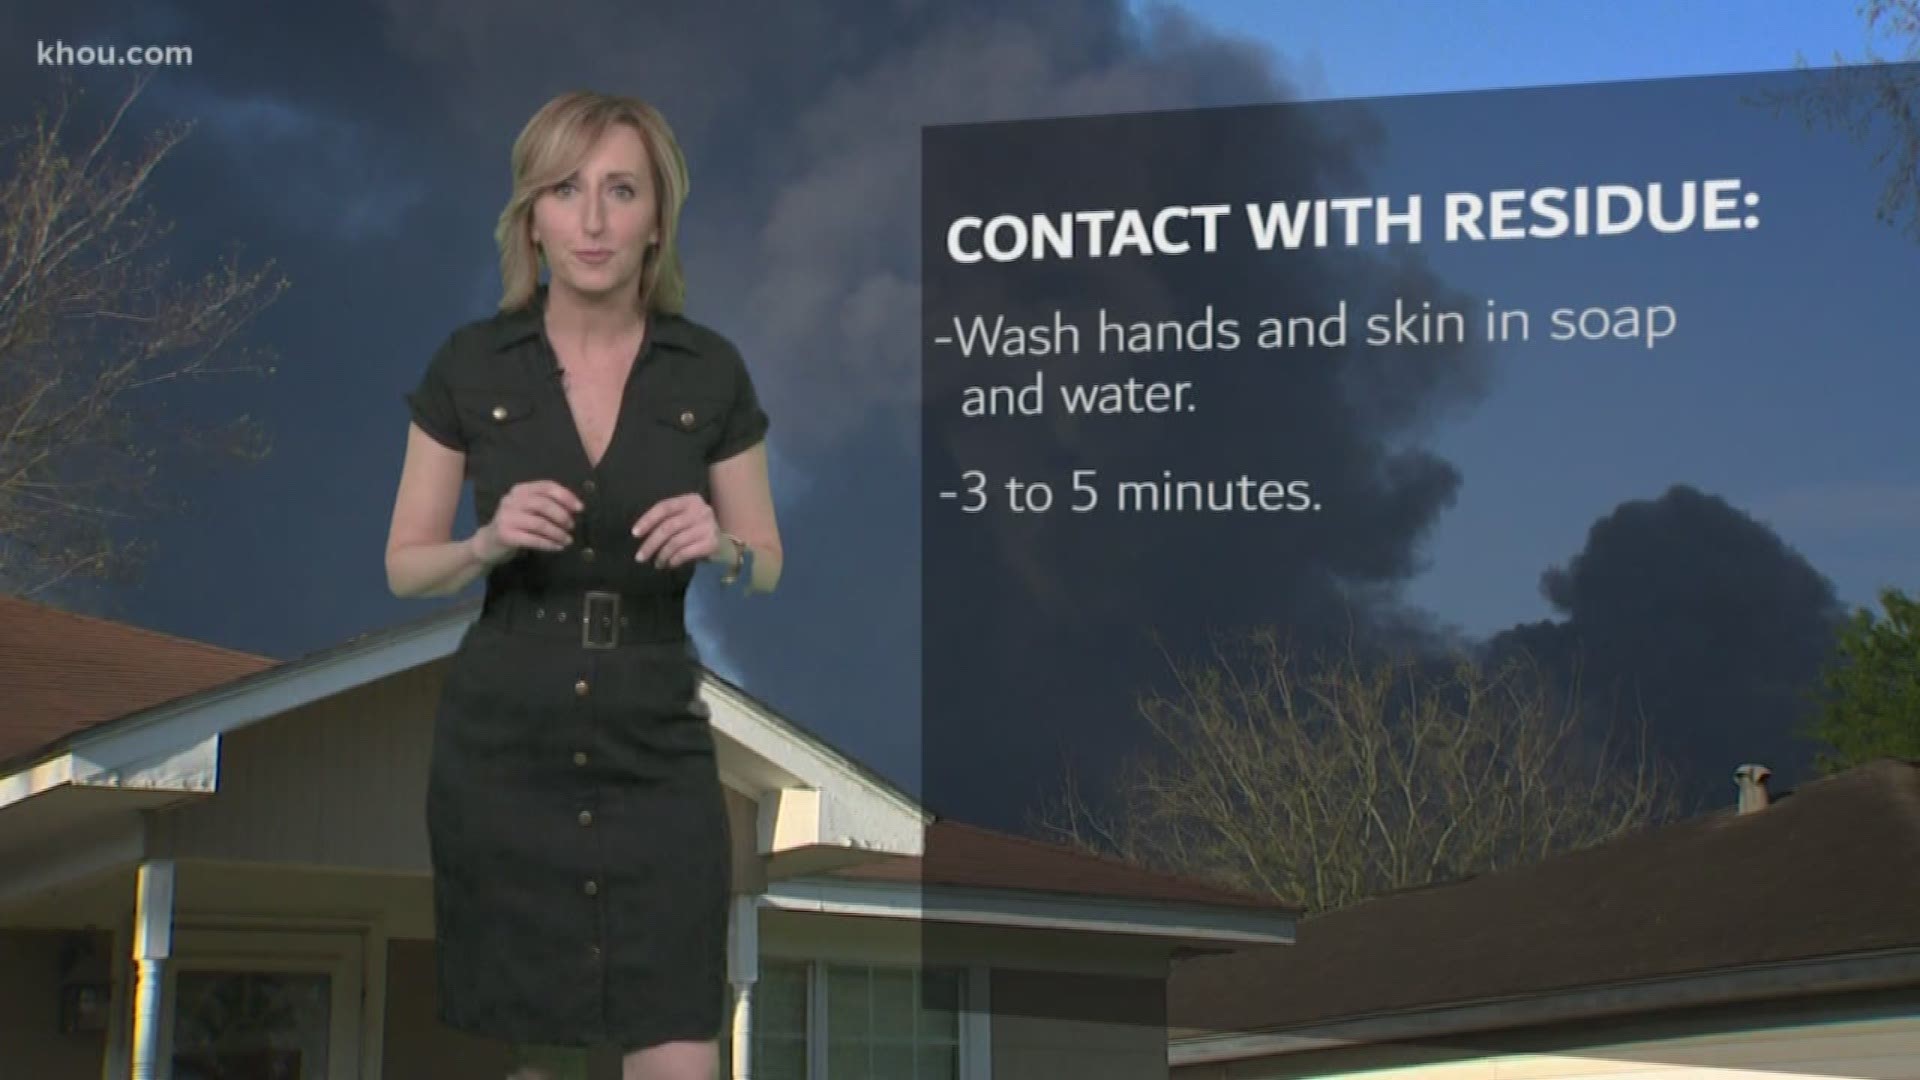 Harris County Public Health says wash your hands and skin for about three to five minutes with soap and water if you come in contact with any residue from the ITC facility fire.